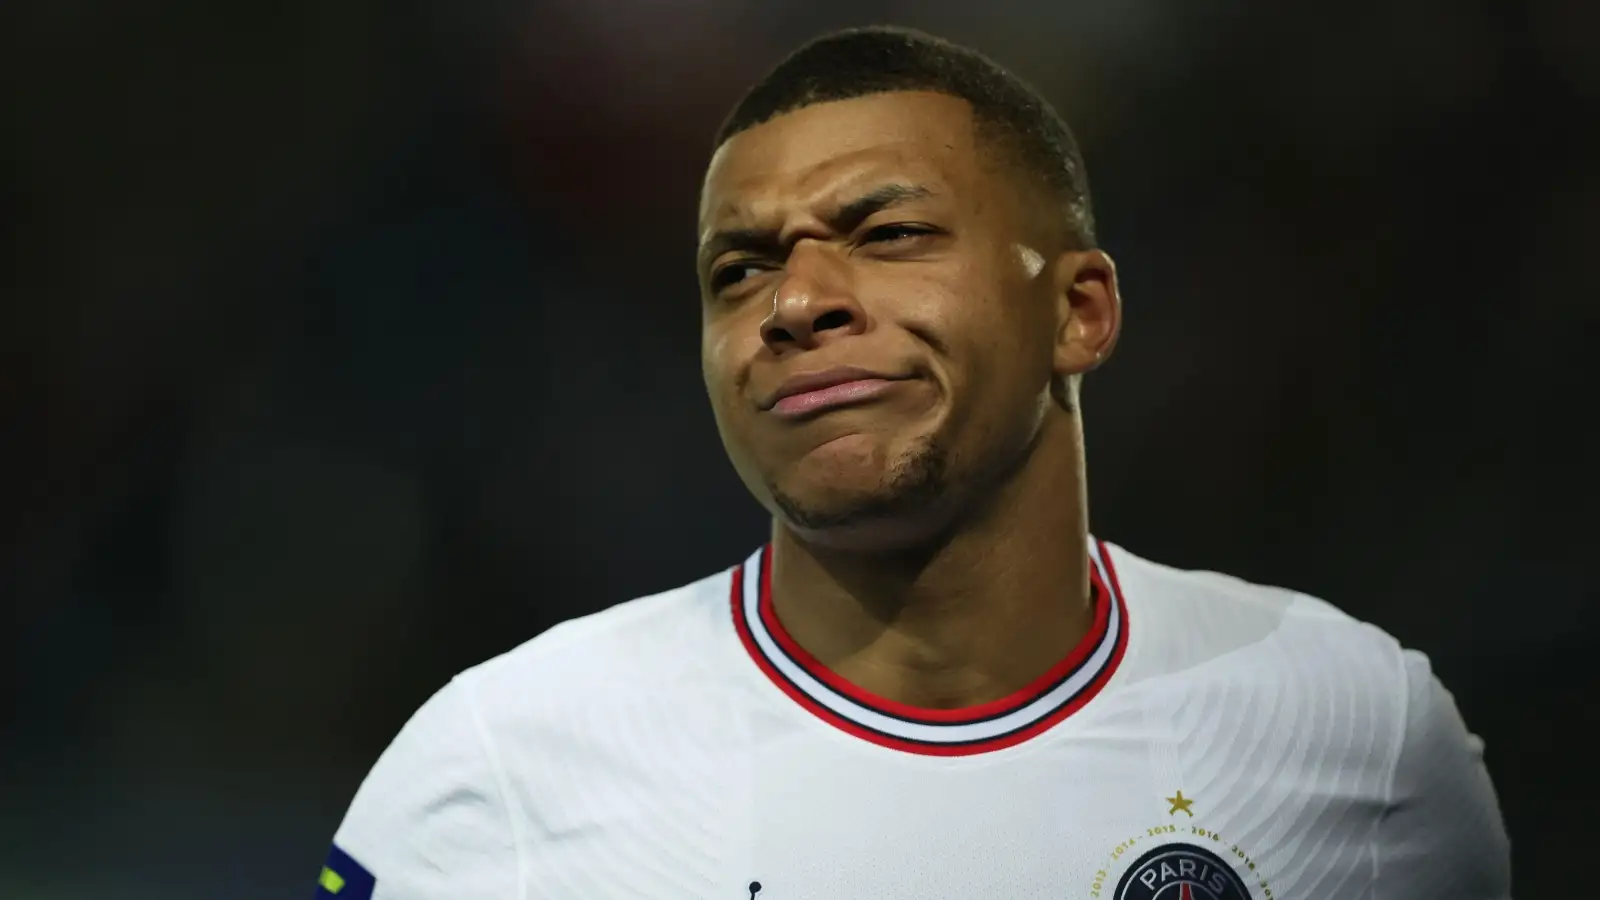 Kylian Mbappe during a match